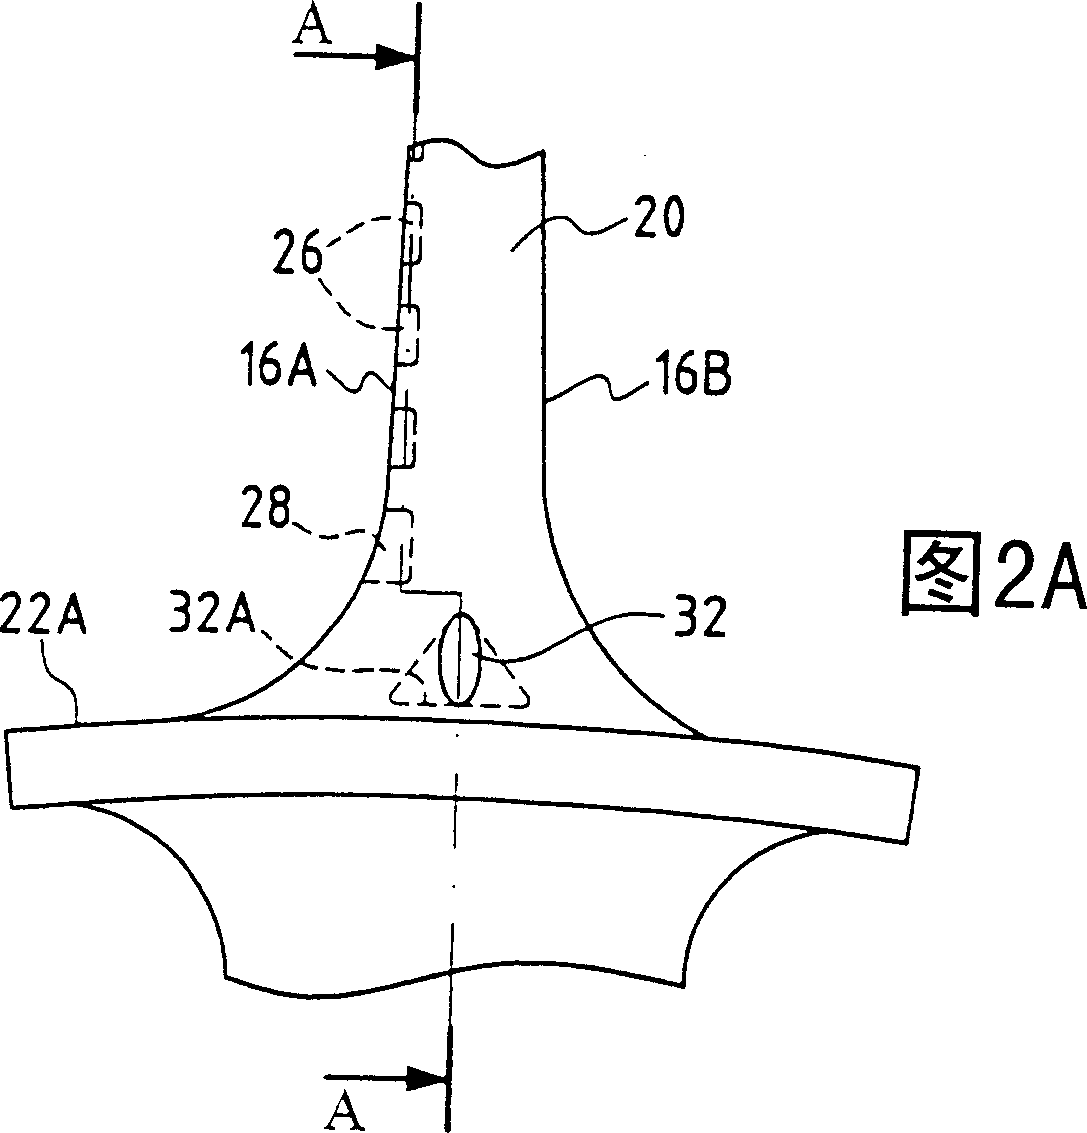 Moving vane with trailing edge for improving thermal behaviour used for high pressure turbine